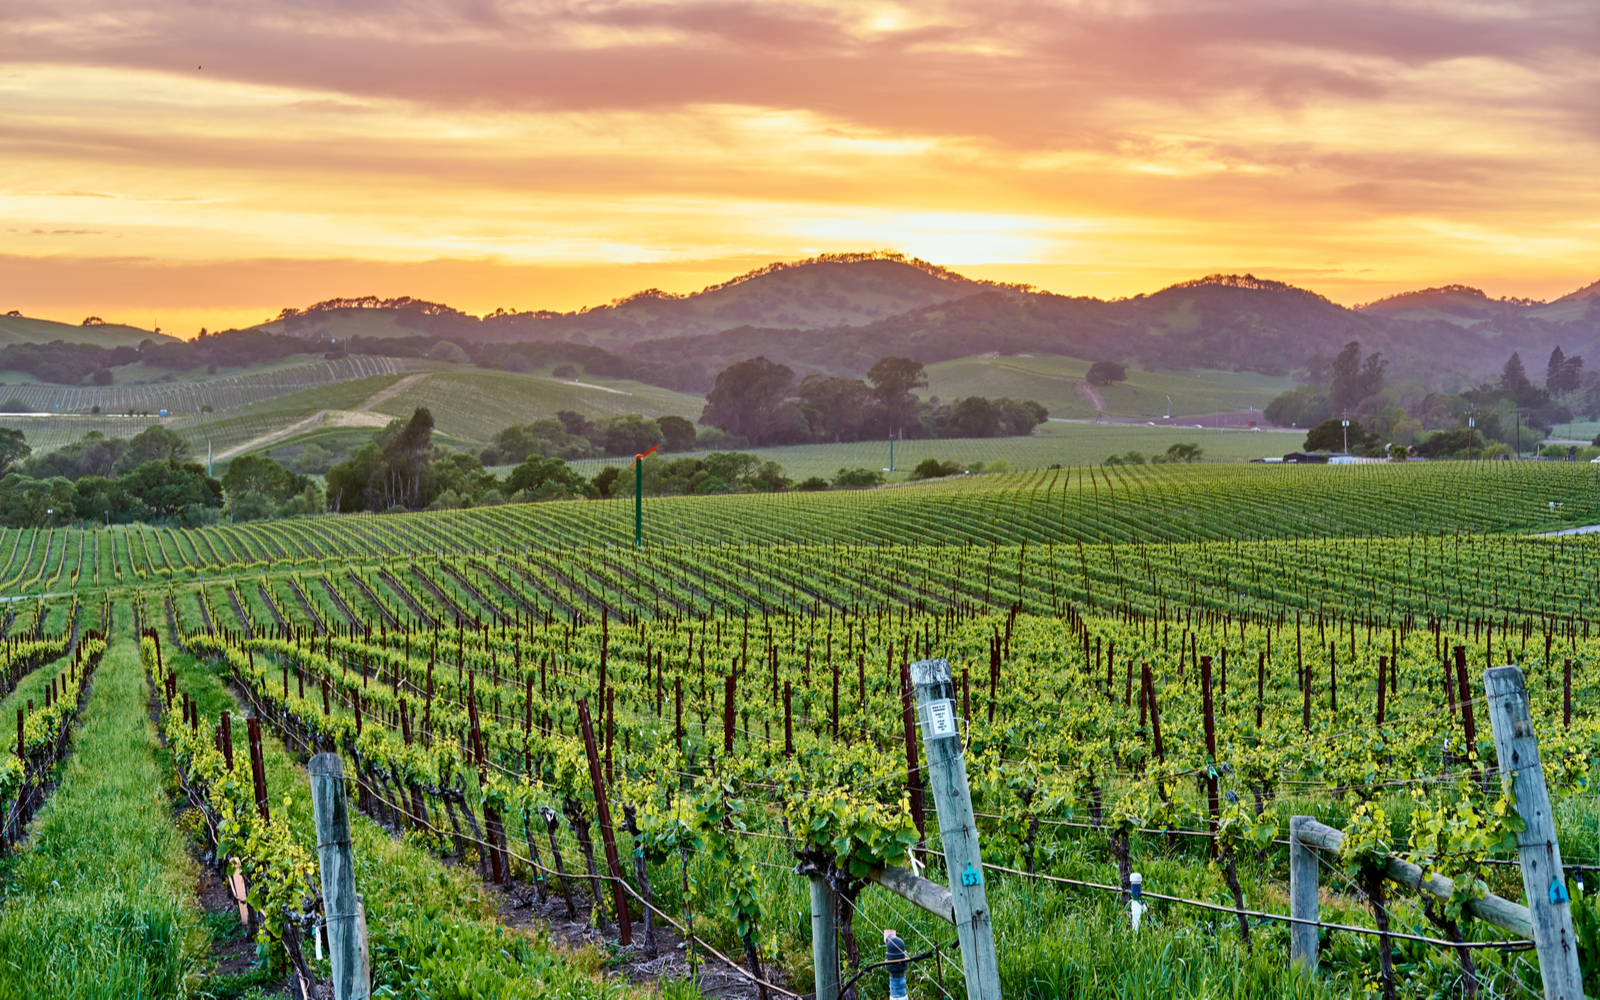 Where to Stay in Napa Valley | Best Areas & Hotels